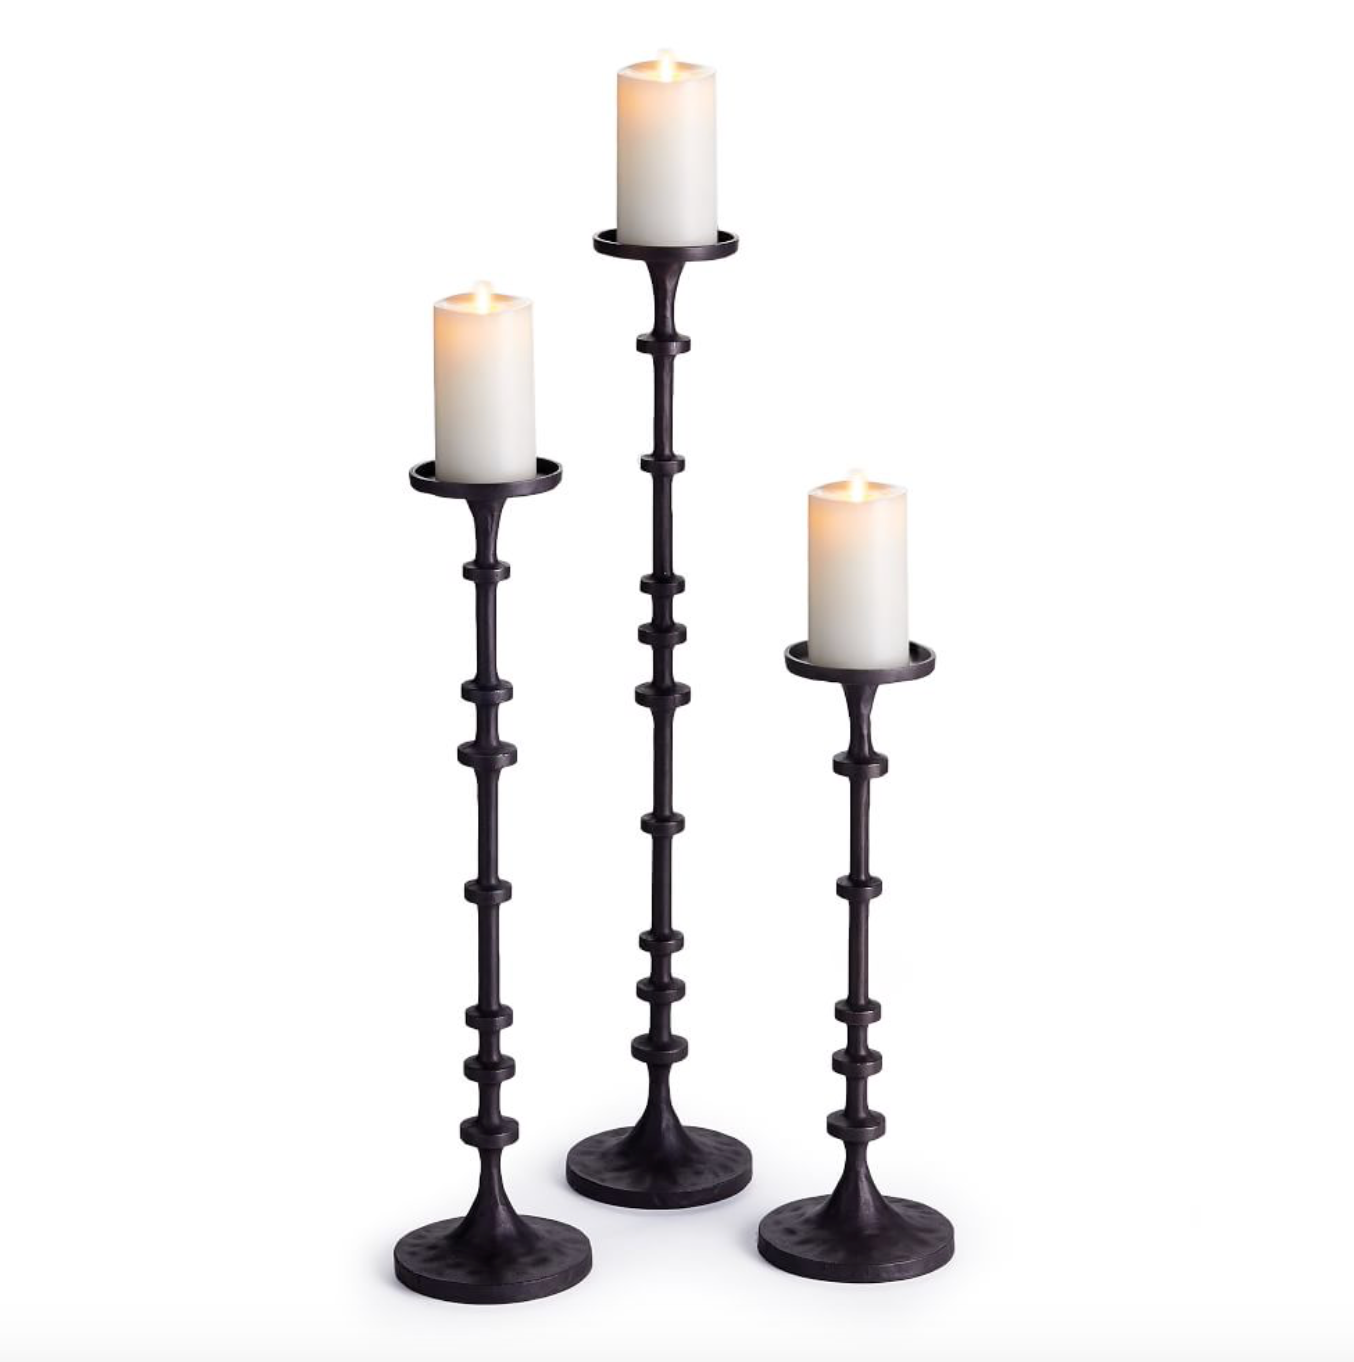 Abacus Candle Stand - Danshire Market and Design , oversized bronze / black candle holders 